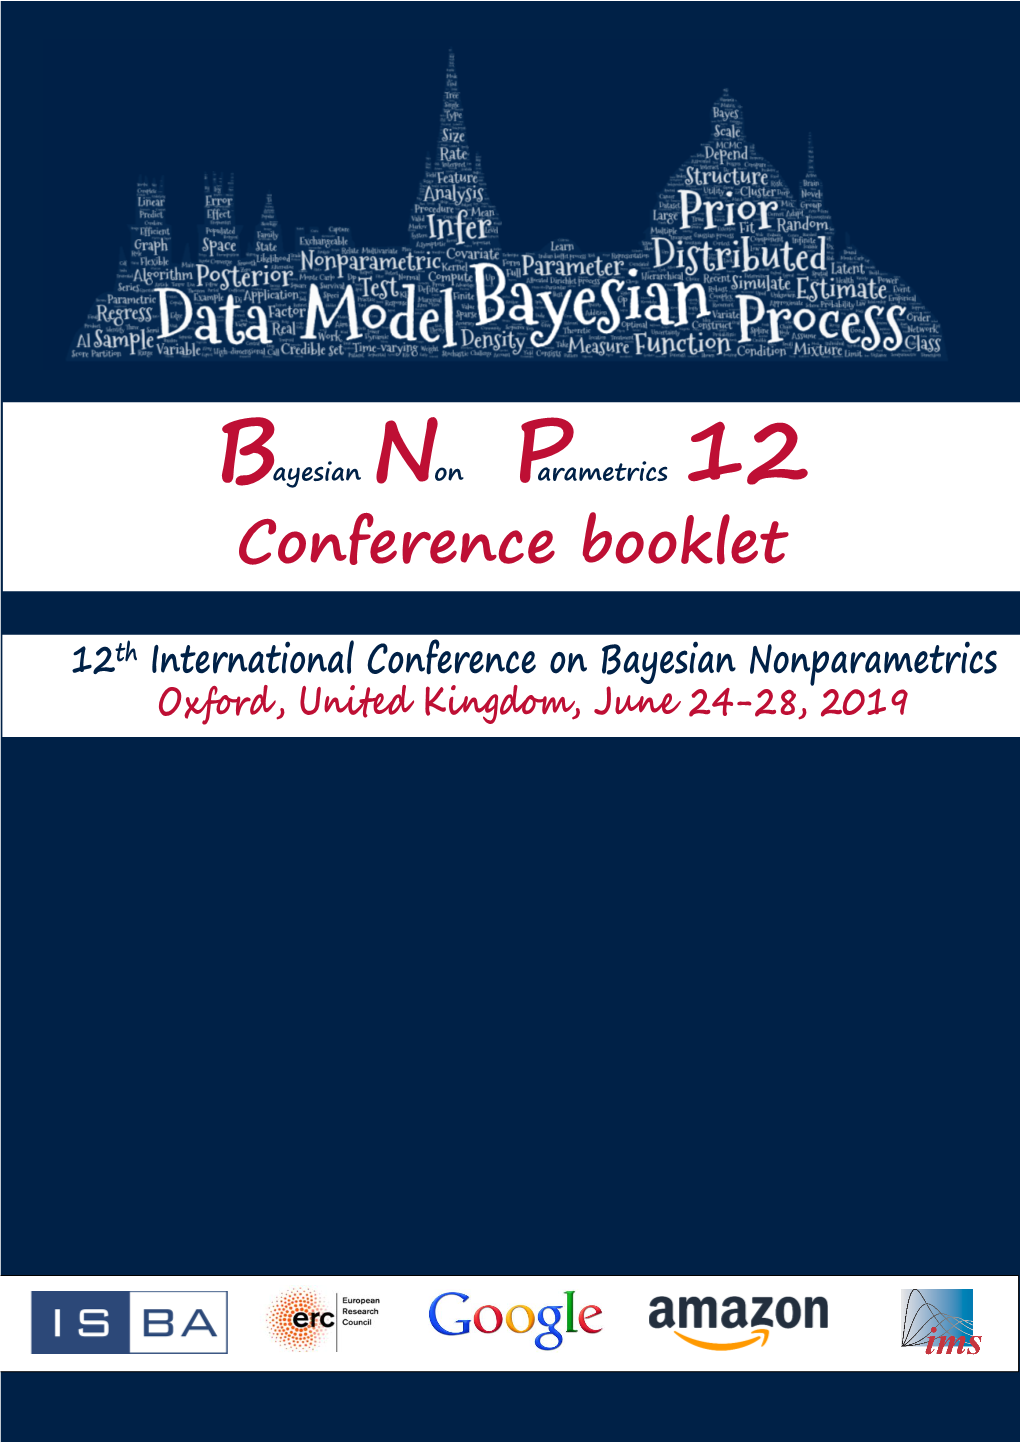 Conference Booklet 12 12Th International Conference on Bayesian Nonparametrics Oxford, United Kingdom, June 24-28, 2019